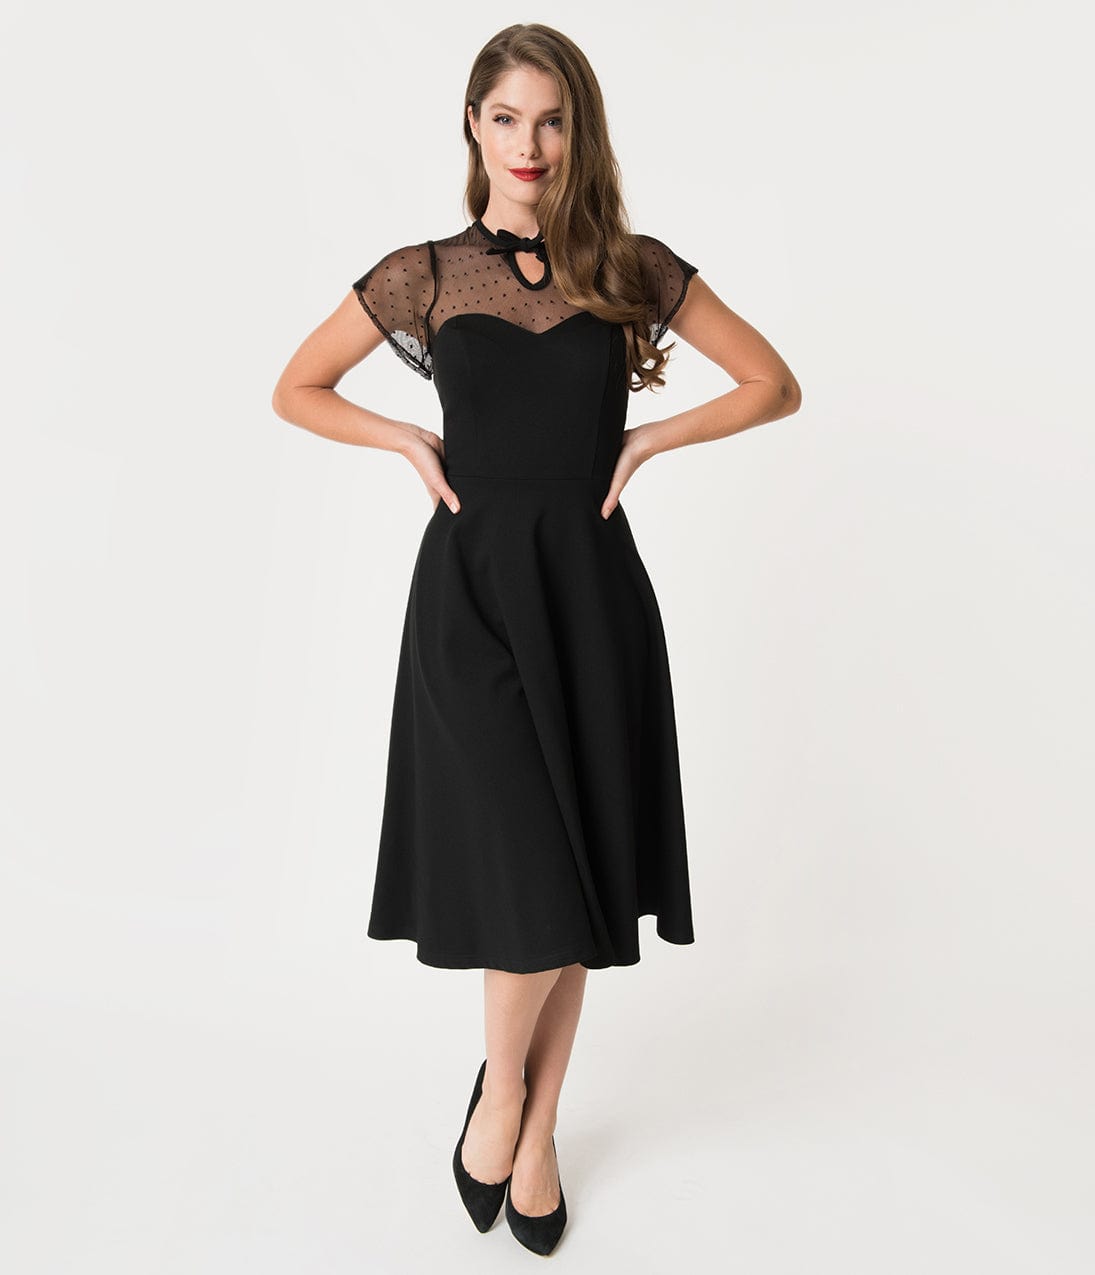 Unique Vintage 1940s Style Black Swiss Dotted Mesh Heather Swing Dress